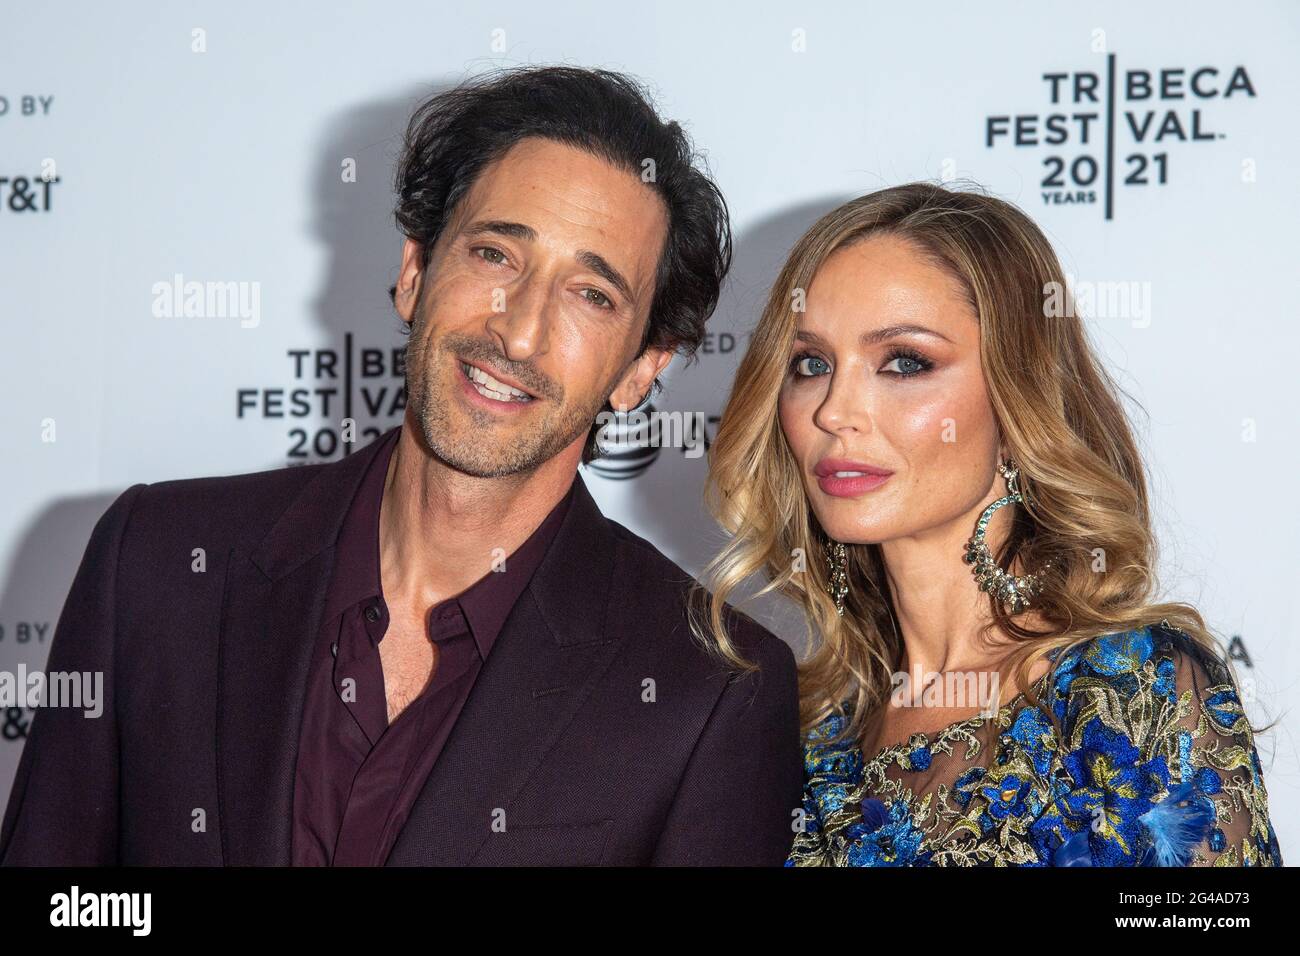 New York, USA. 19th June 2020. Adrien Brody and Georgina Chapman attend 'Clean' Premiere during 2021 Tribeca Festival at Brooklyn Commons at MetroTech on June 19, 2021 in New York City. Credit: Ron Adar/Alamy Live News Stock Photo